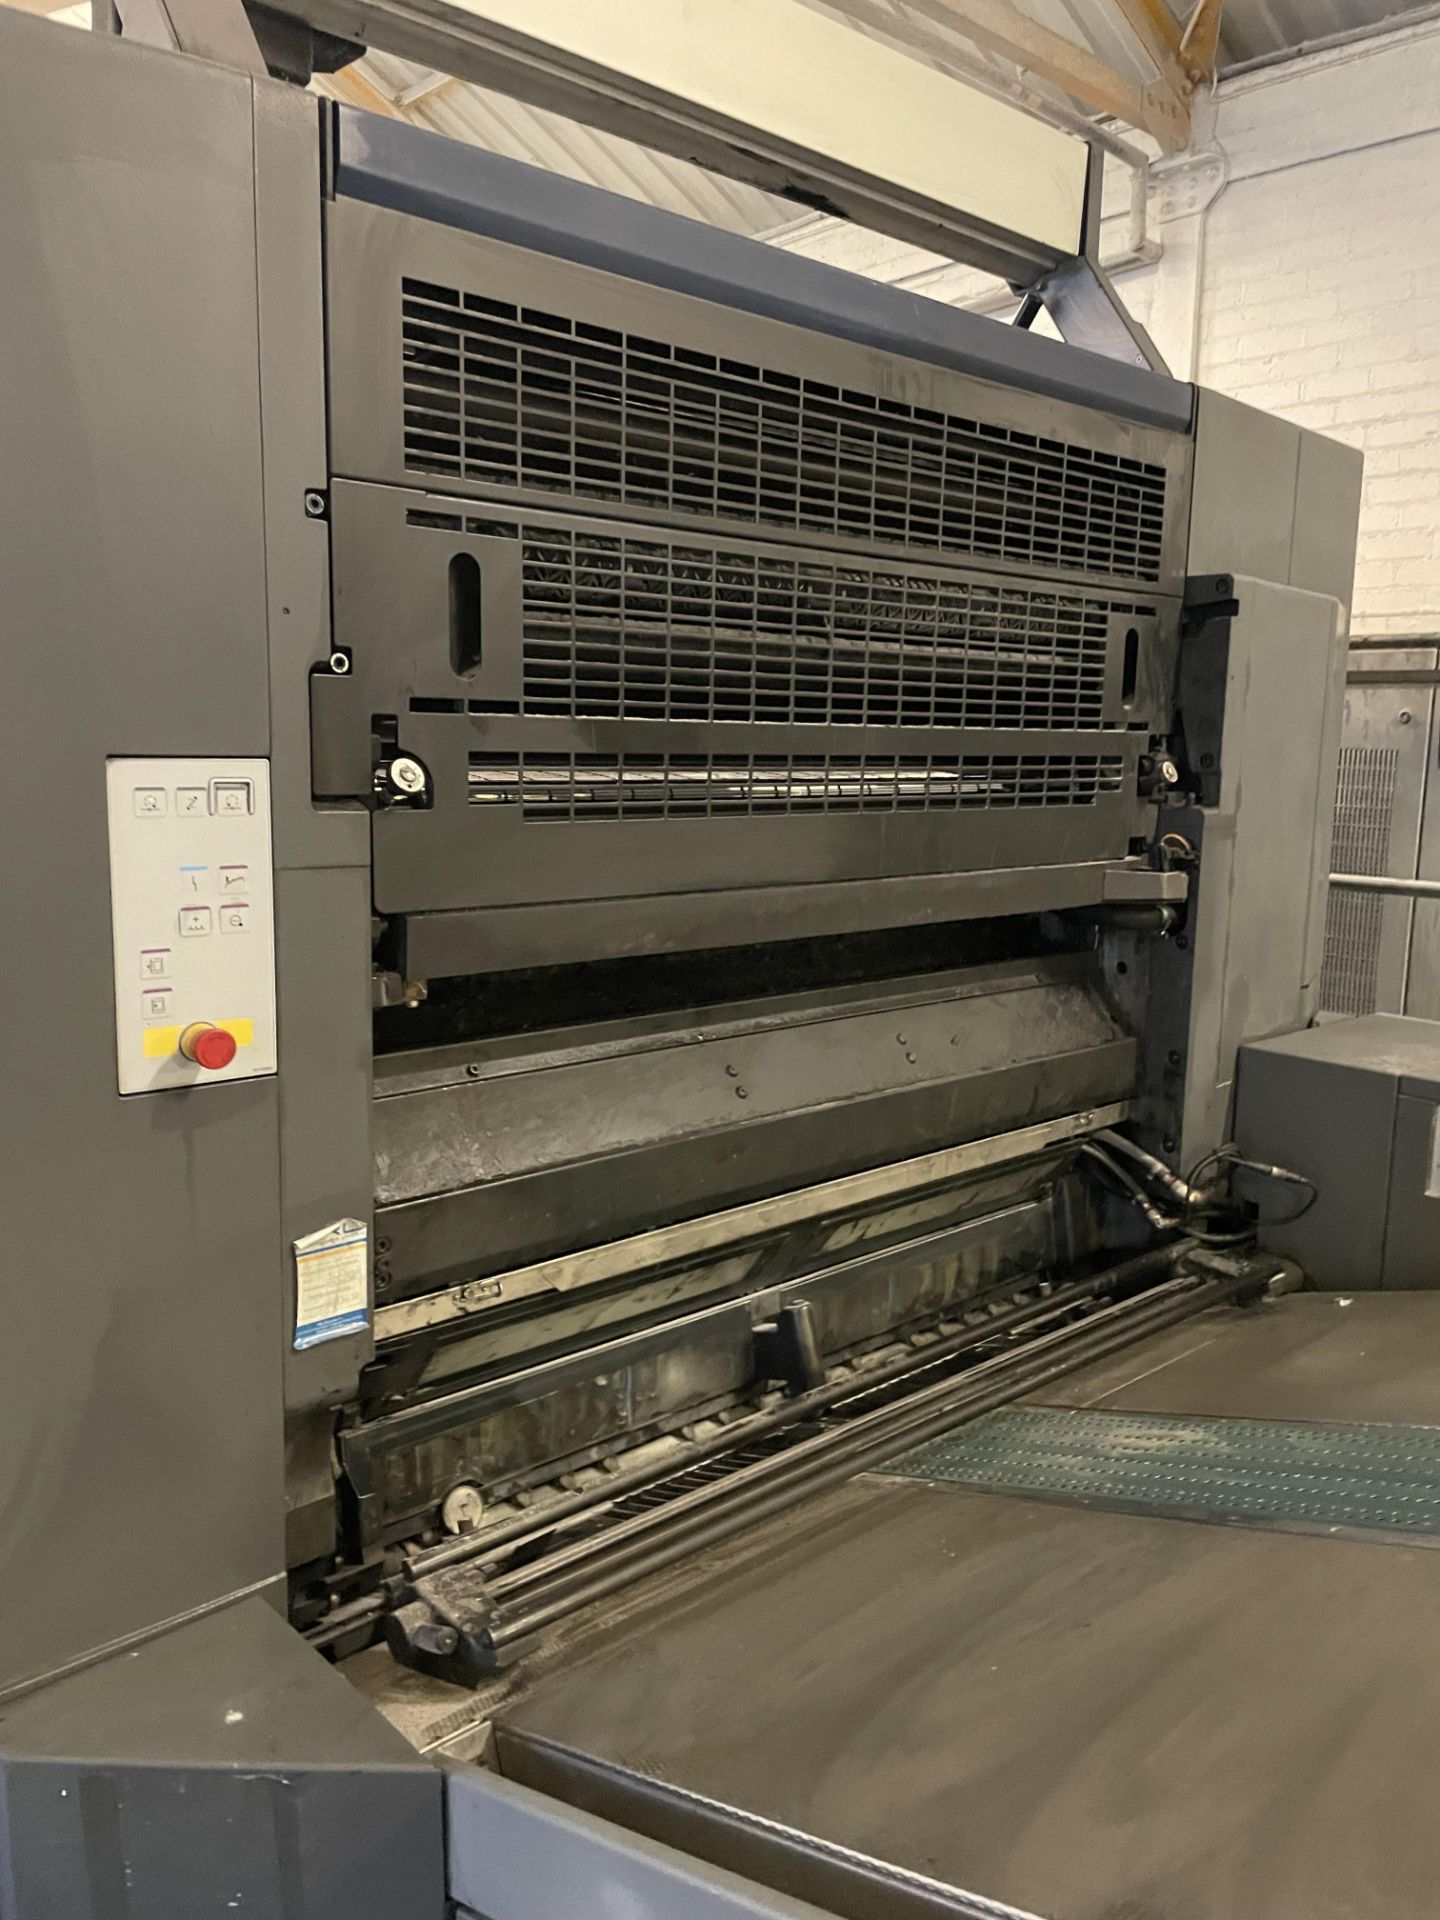 Heidelberg SM102 10P 10 COLOUR PRINTING PRESS, serial number 547720, year of manufacture 2006, circa - Image 7 of 18